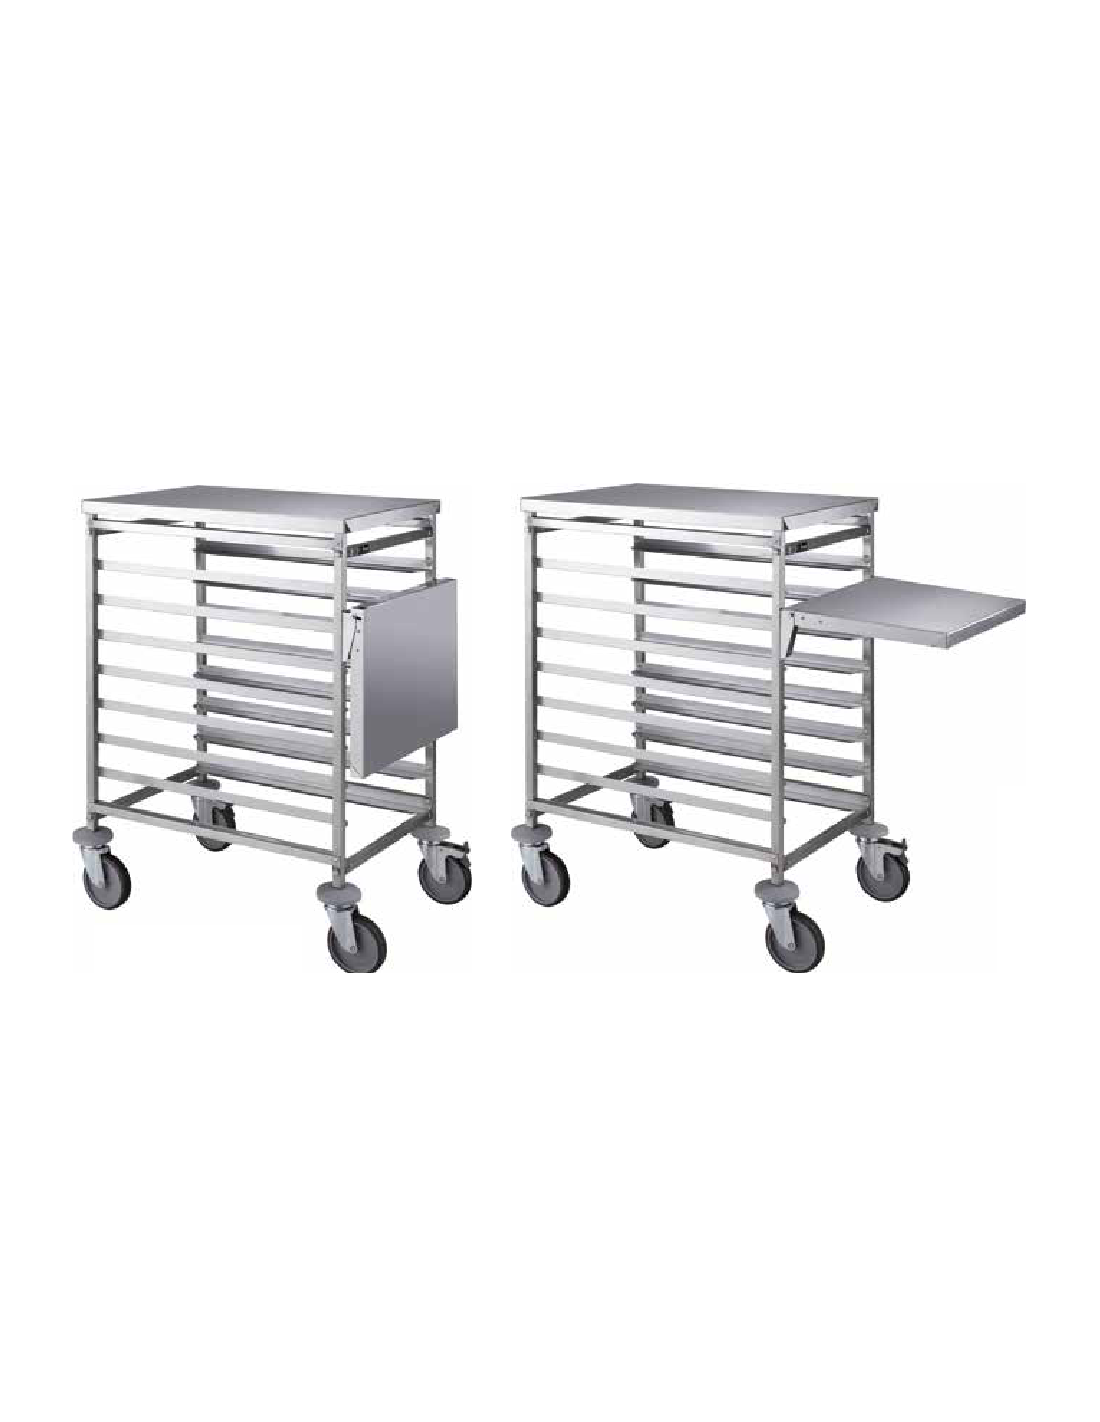 Trolley for pasta boxes - Capacity 8 boxes cm 7h - Cm 103.5 x 52 x 94 h